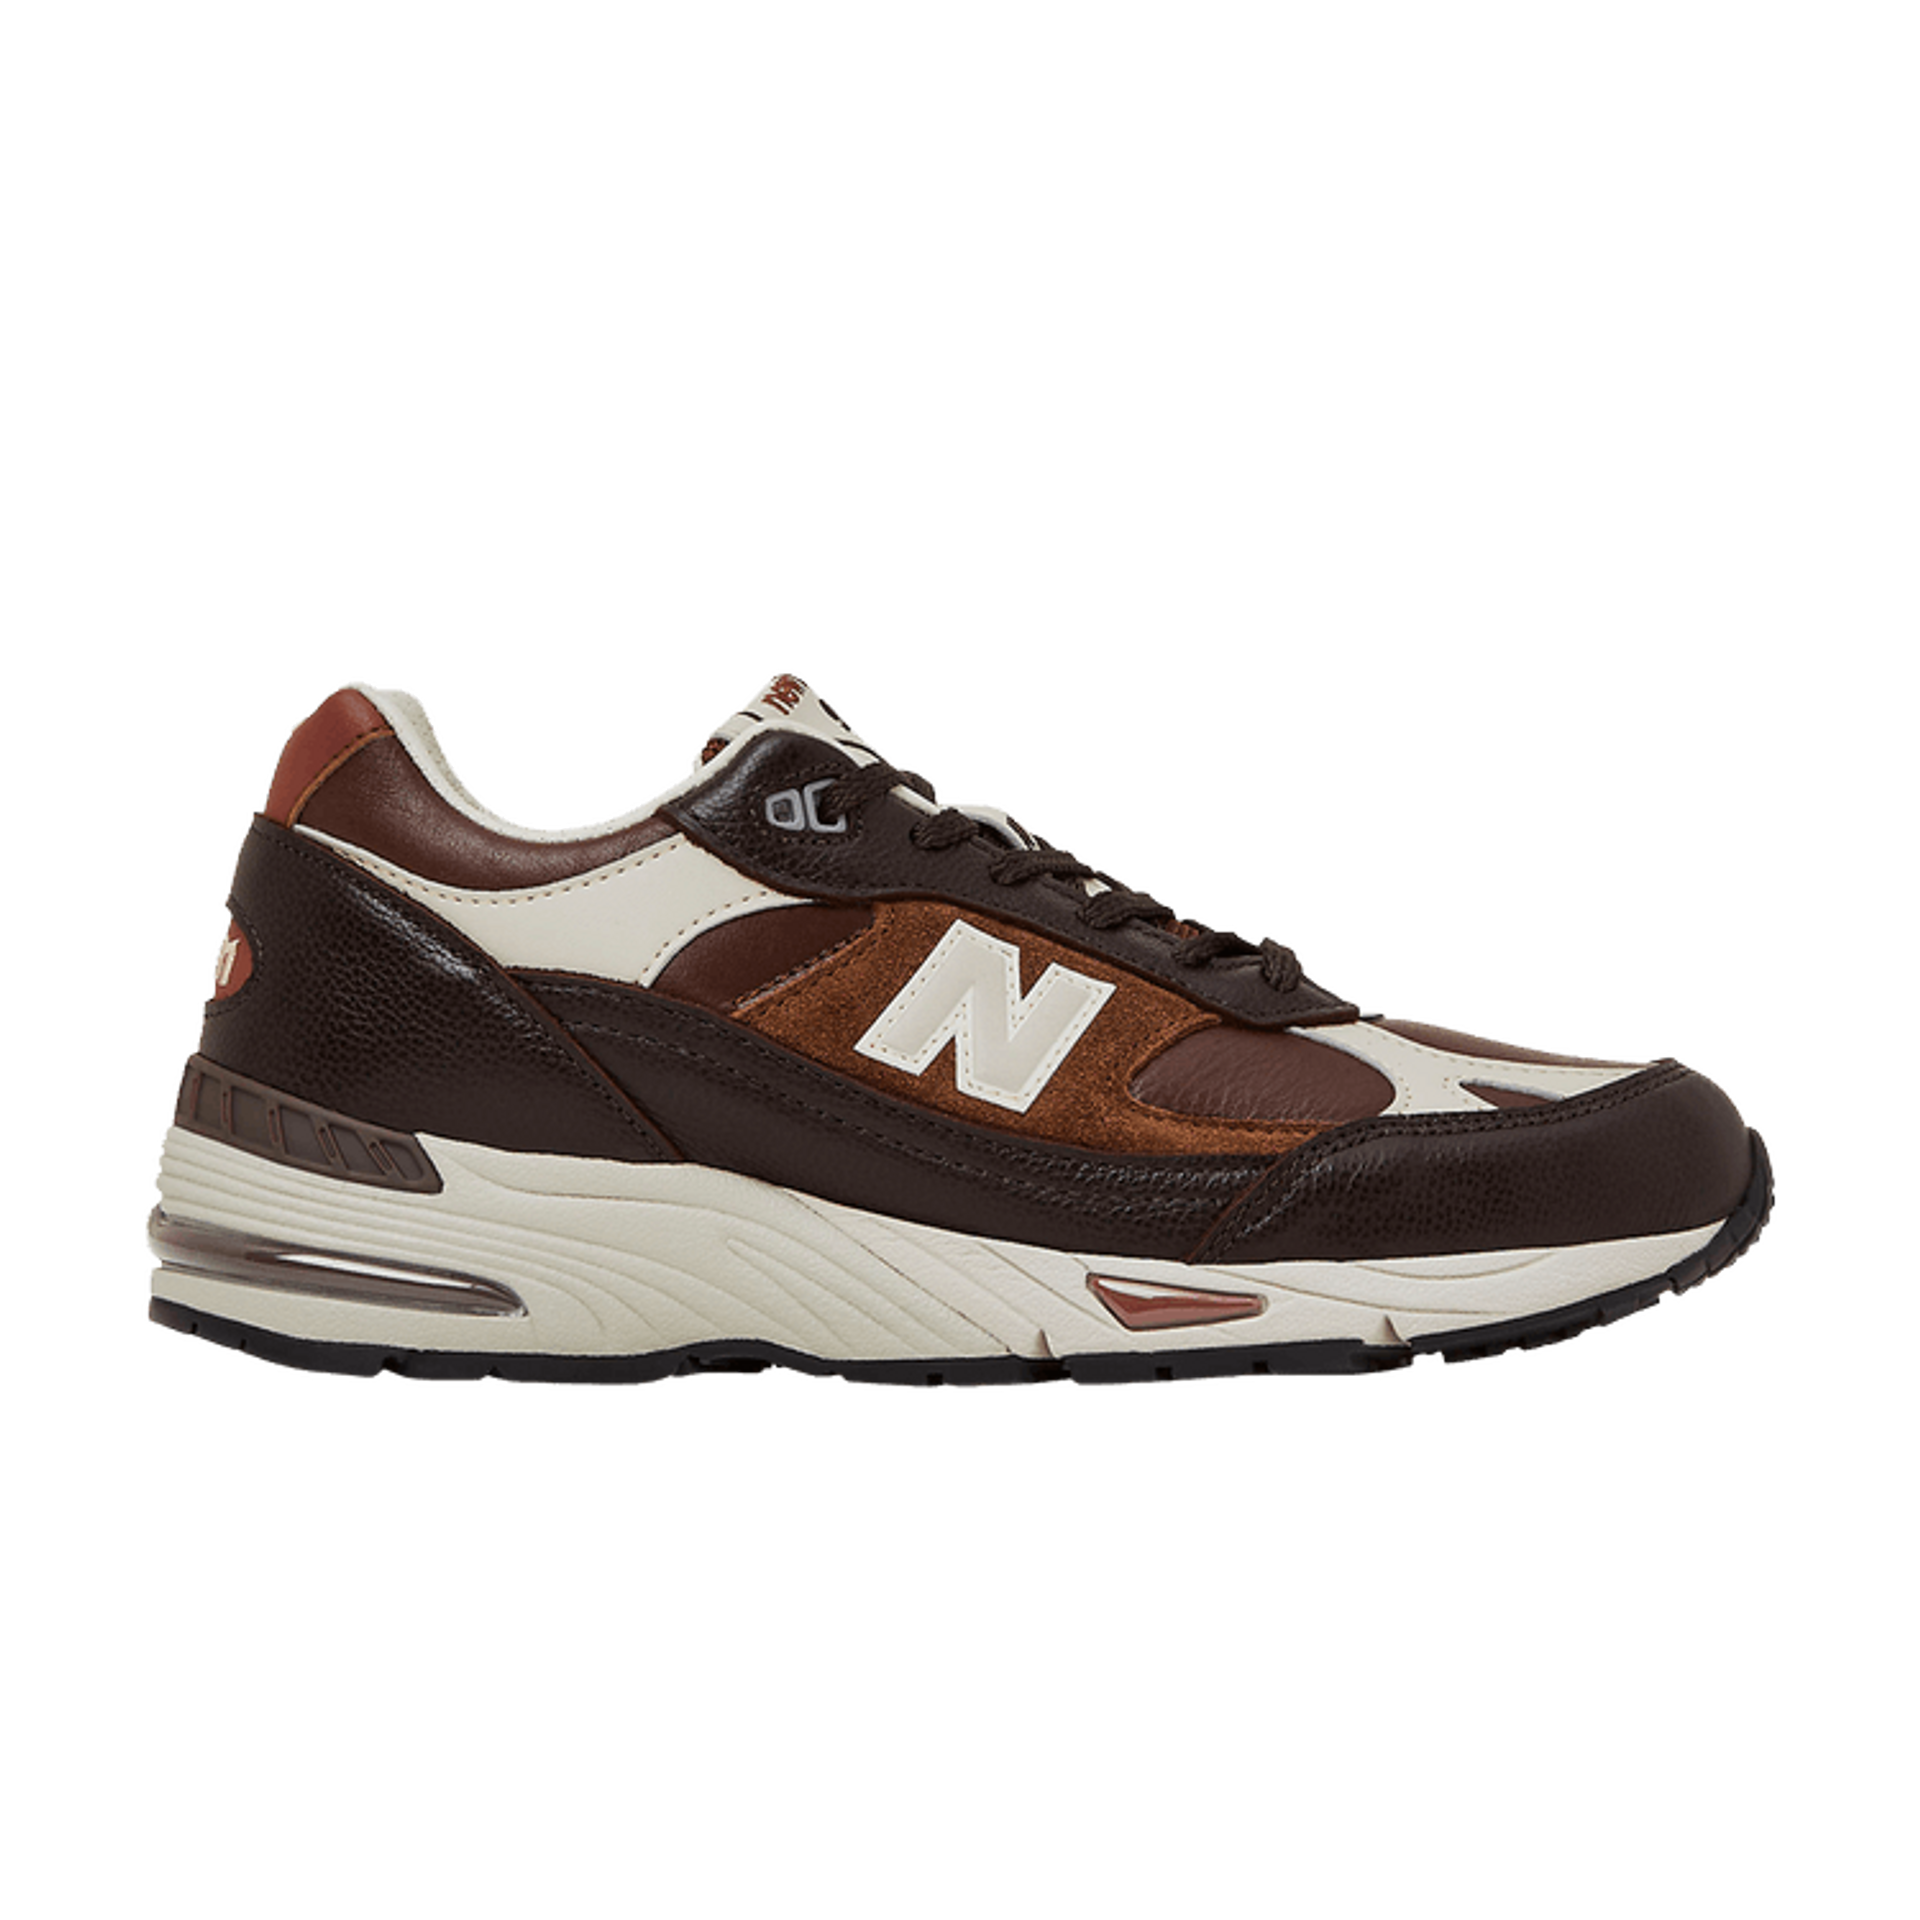 New Balance 991 Made in England 'French Roast'